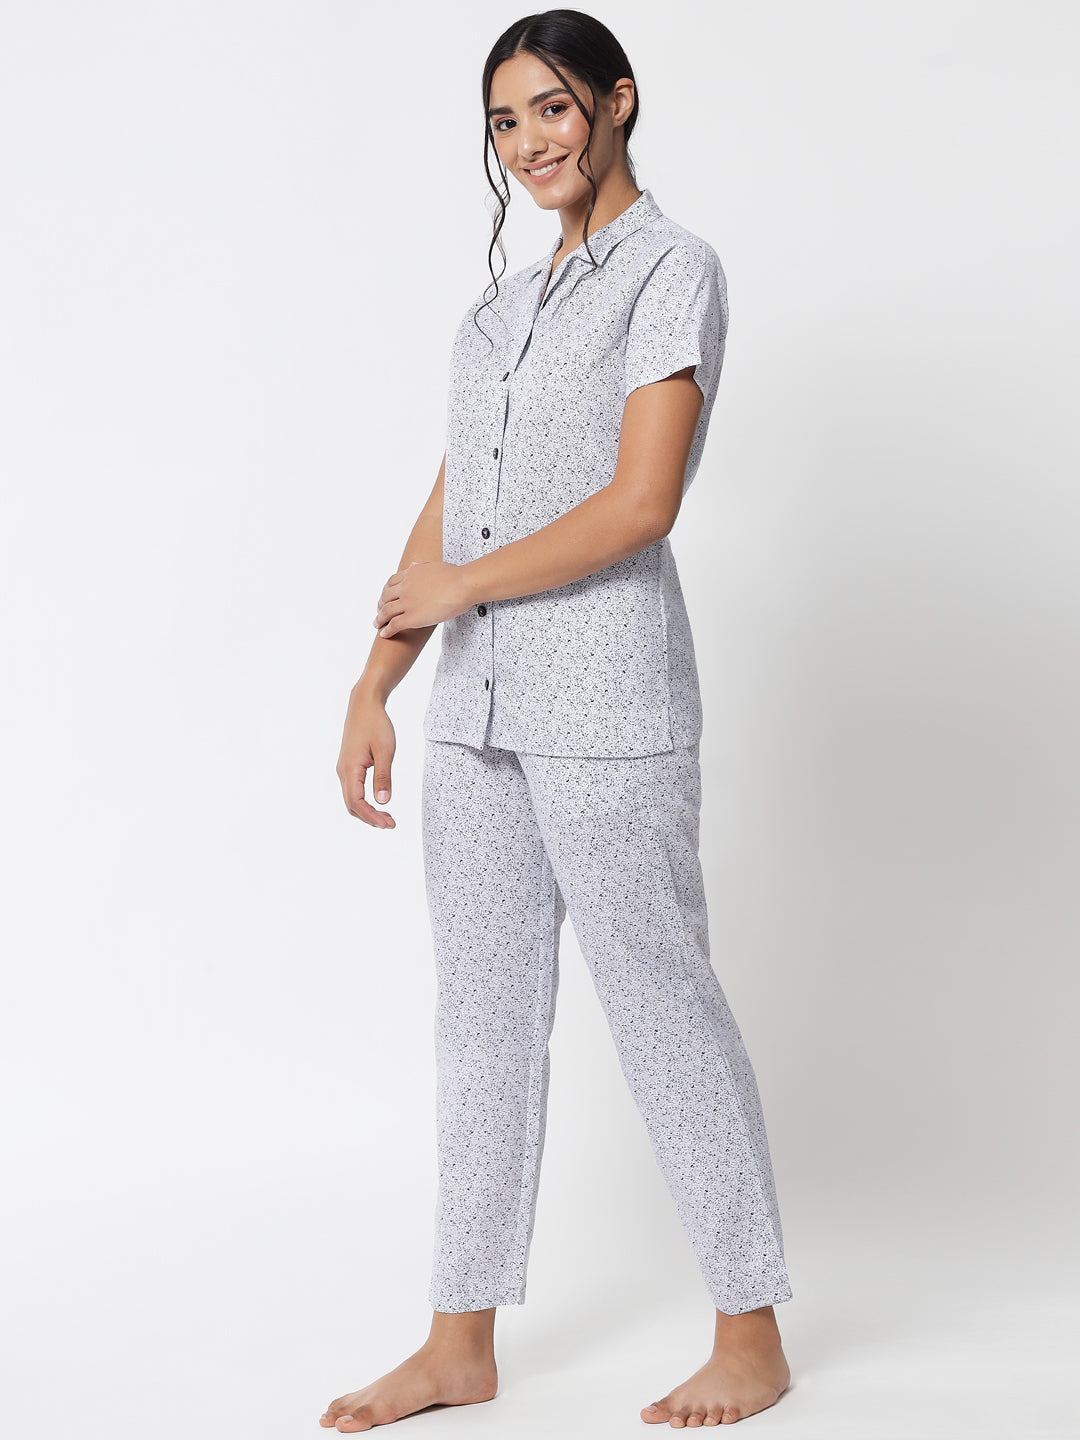 printed-button-down-nightsuit-for-women-n78aw